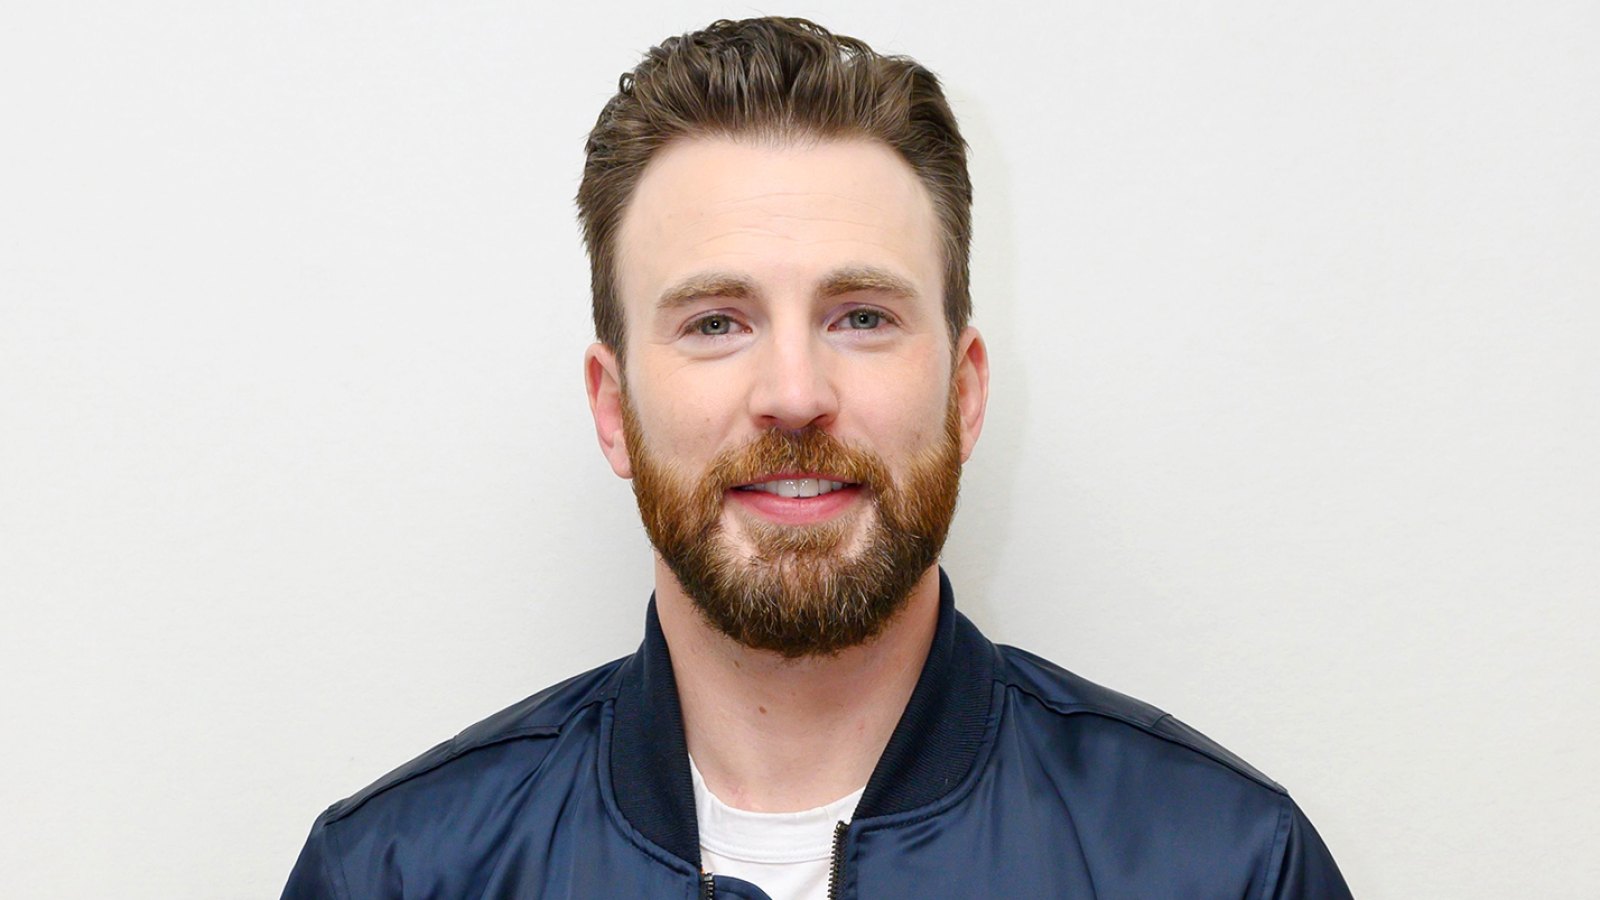 Chris Evans Is 'Laser-Focused' On Finding The One